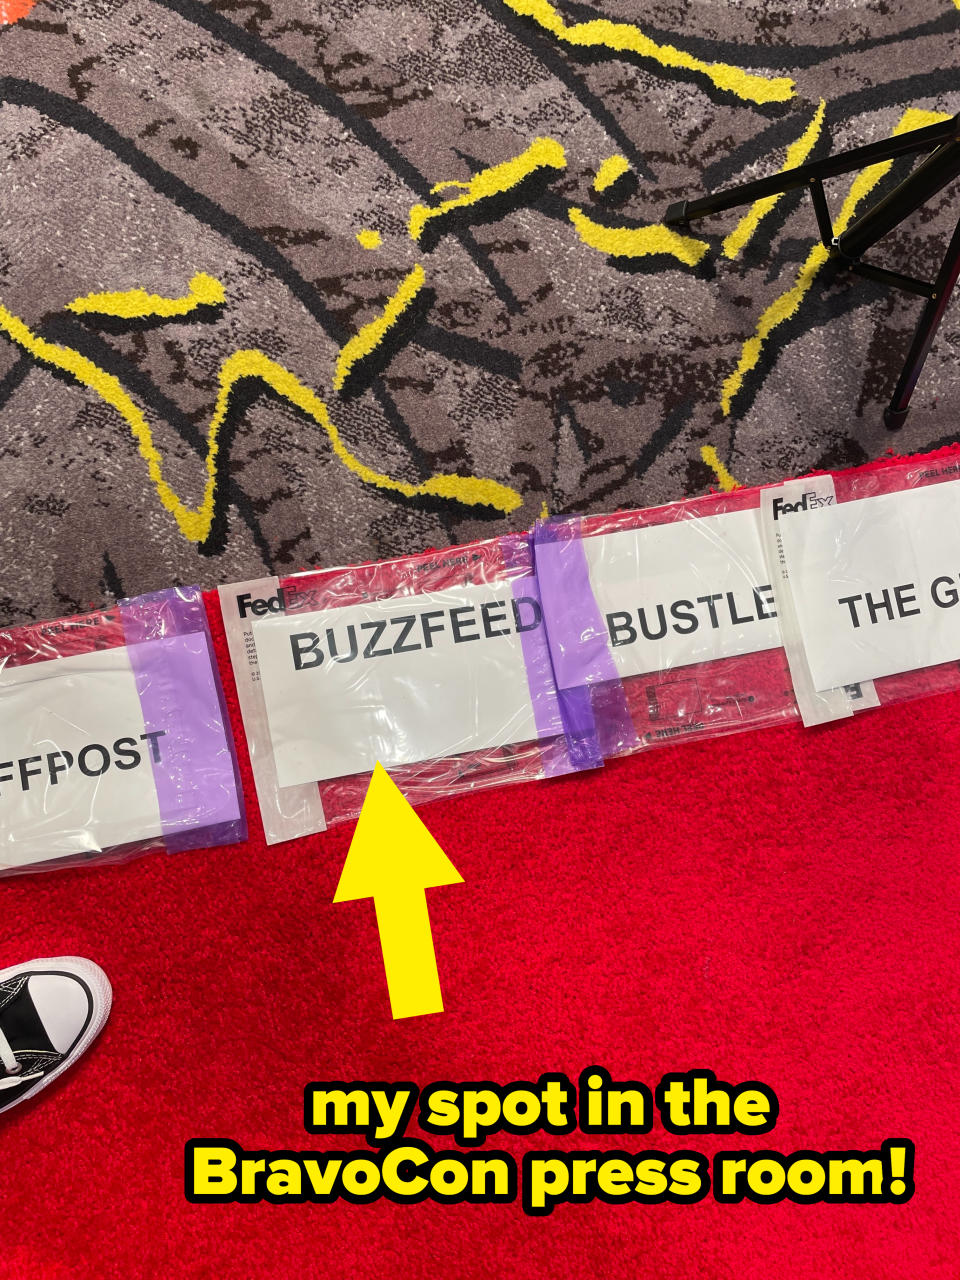 A shot of the author's feet on the red carpet displaying the "BuzzFeed" press sign